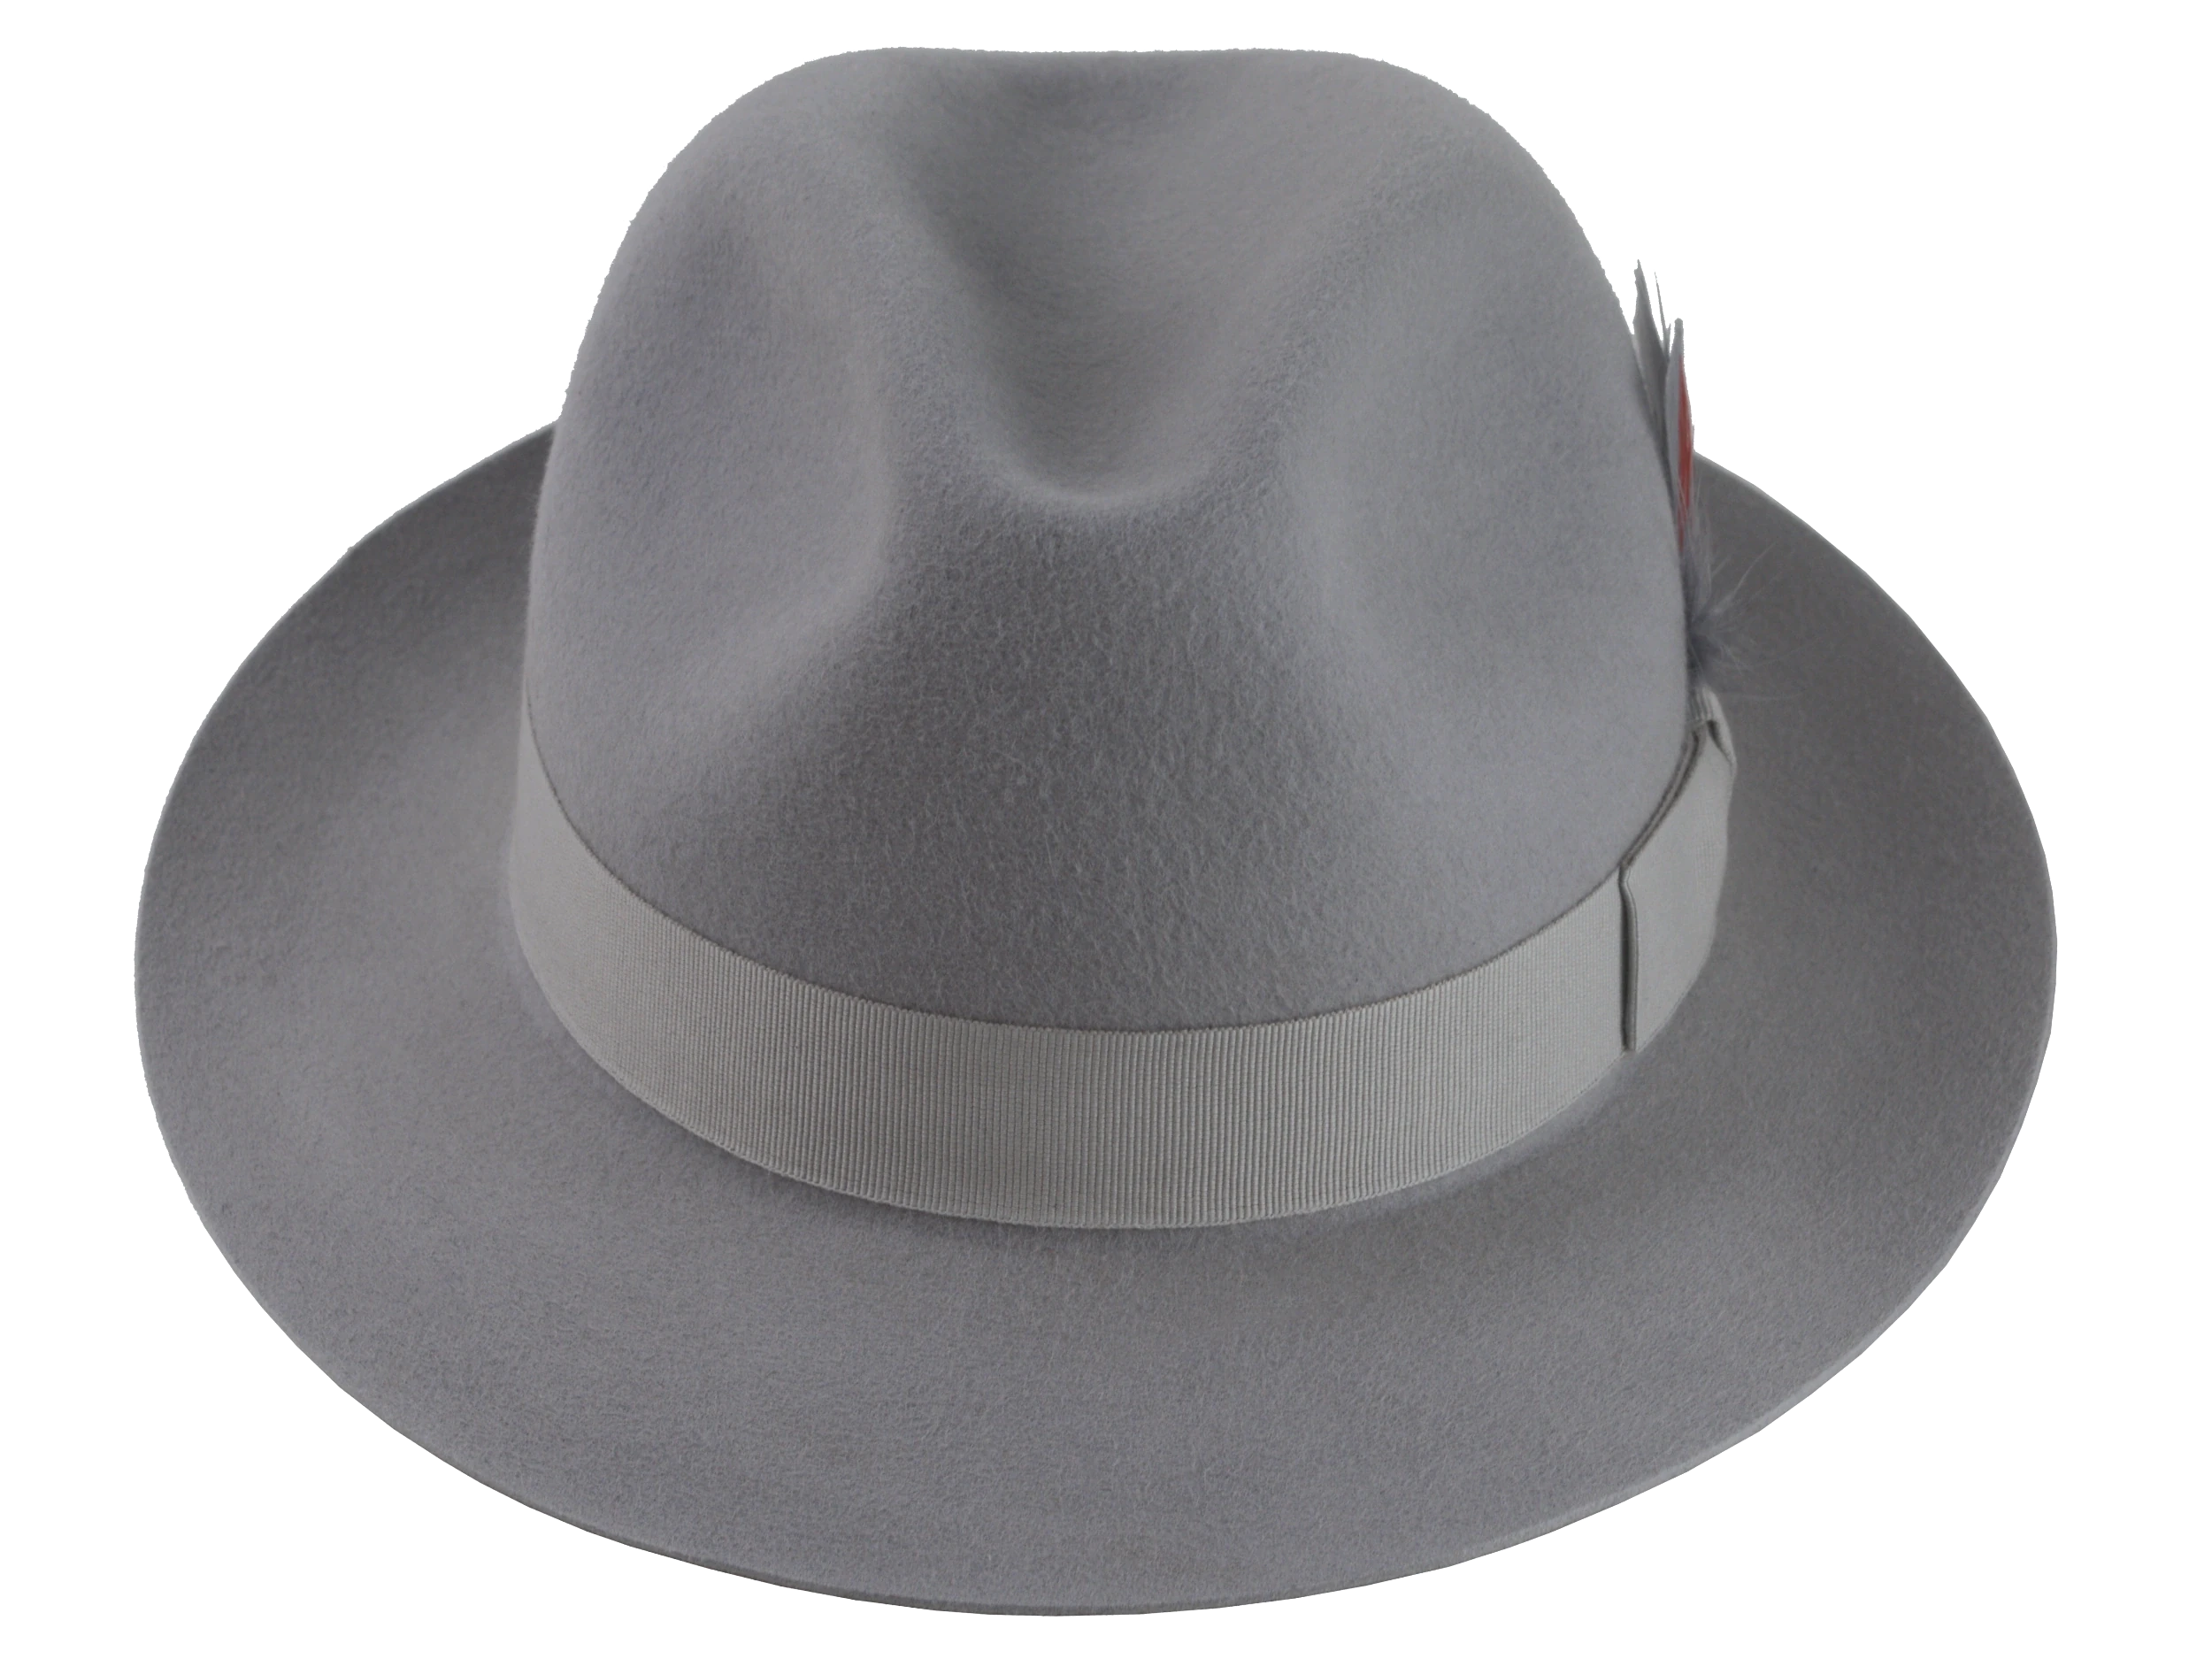 Overhead view of the Phoenix Fedora showcasing the full silhouette, perfect for accessorizing any style.